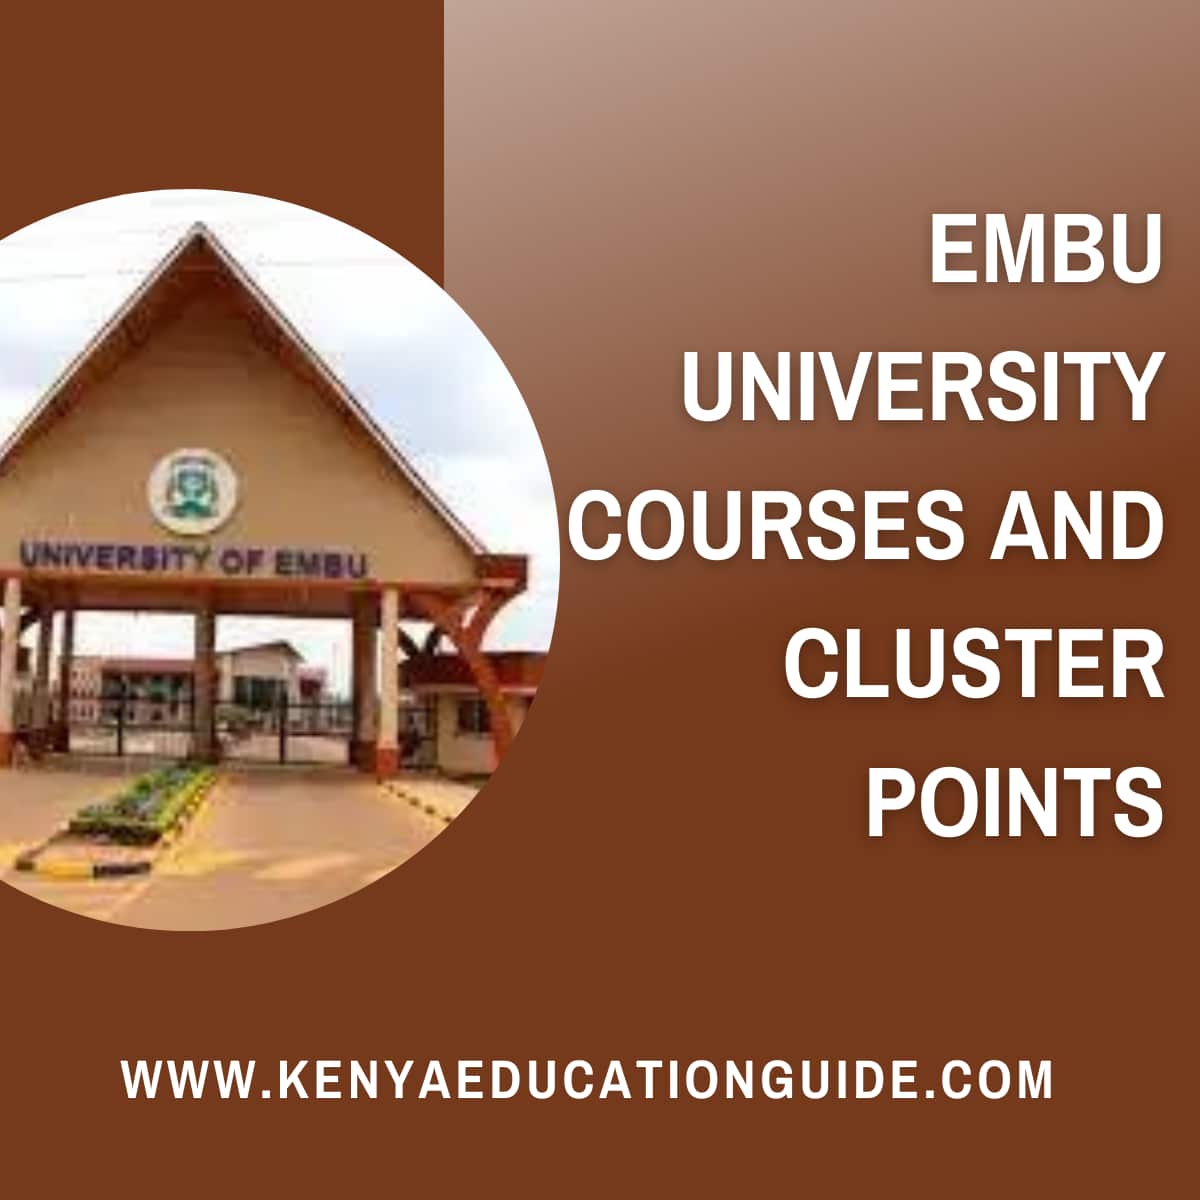 Embu University Courses and Cluster Points